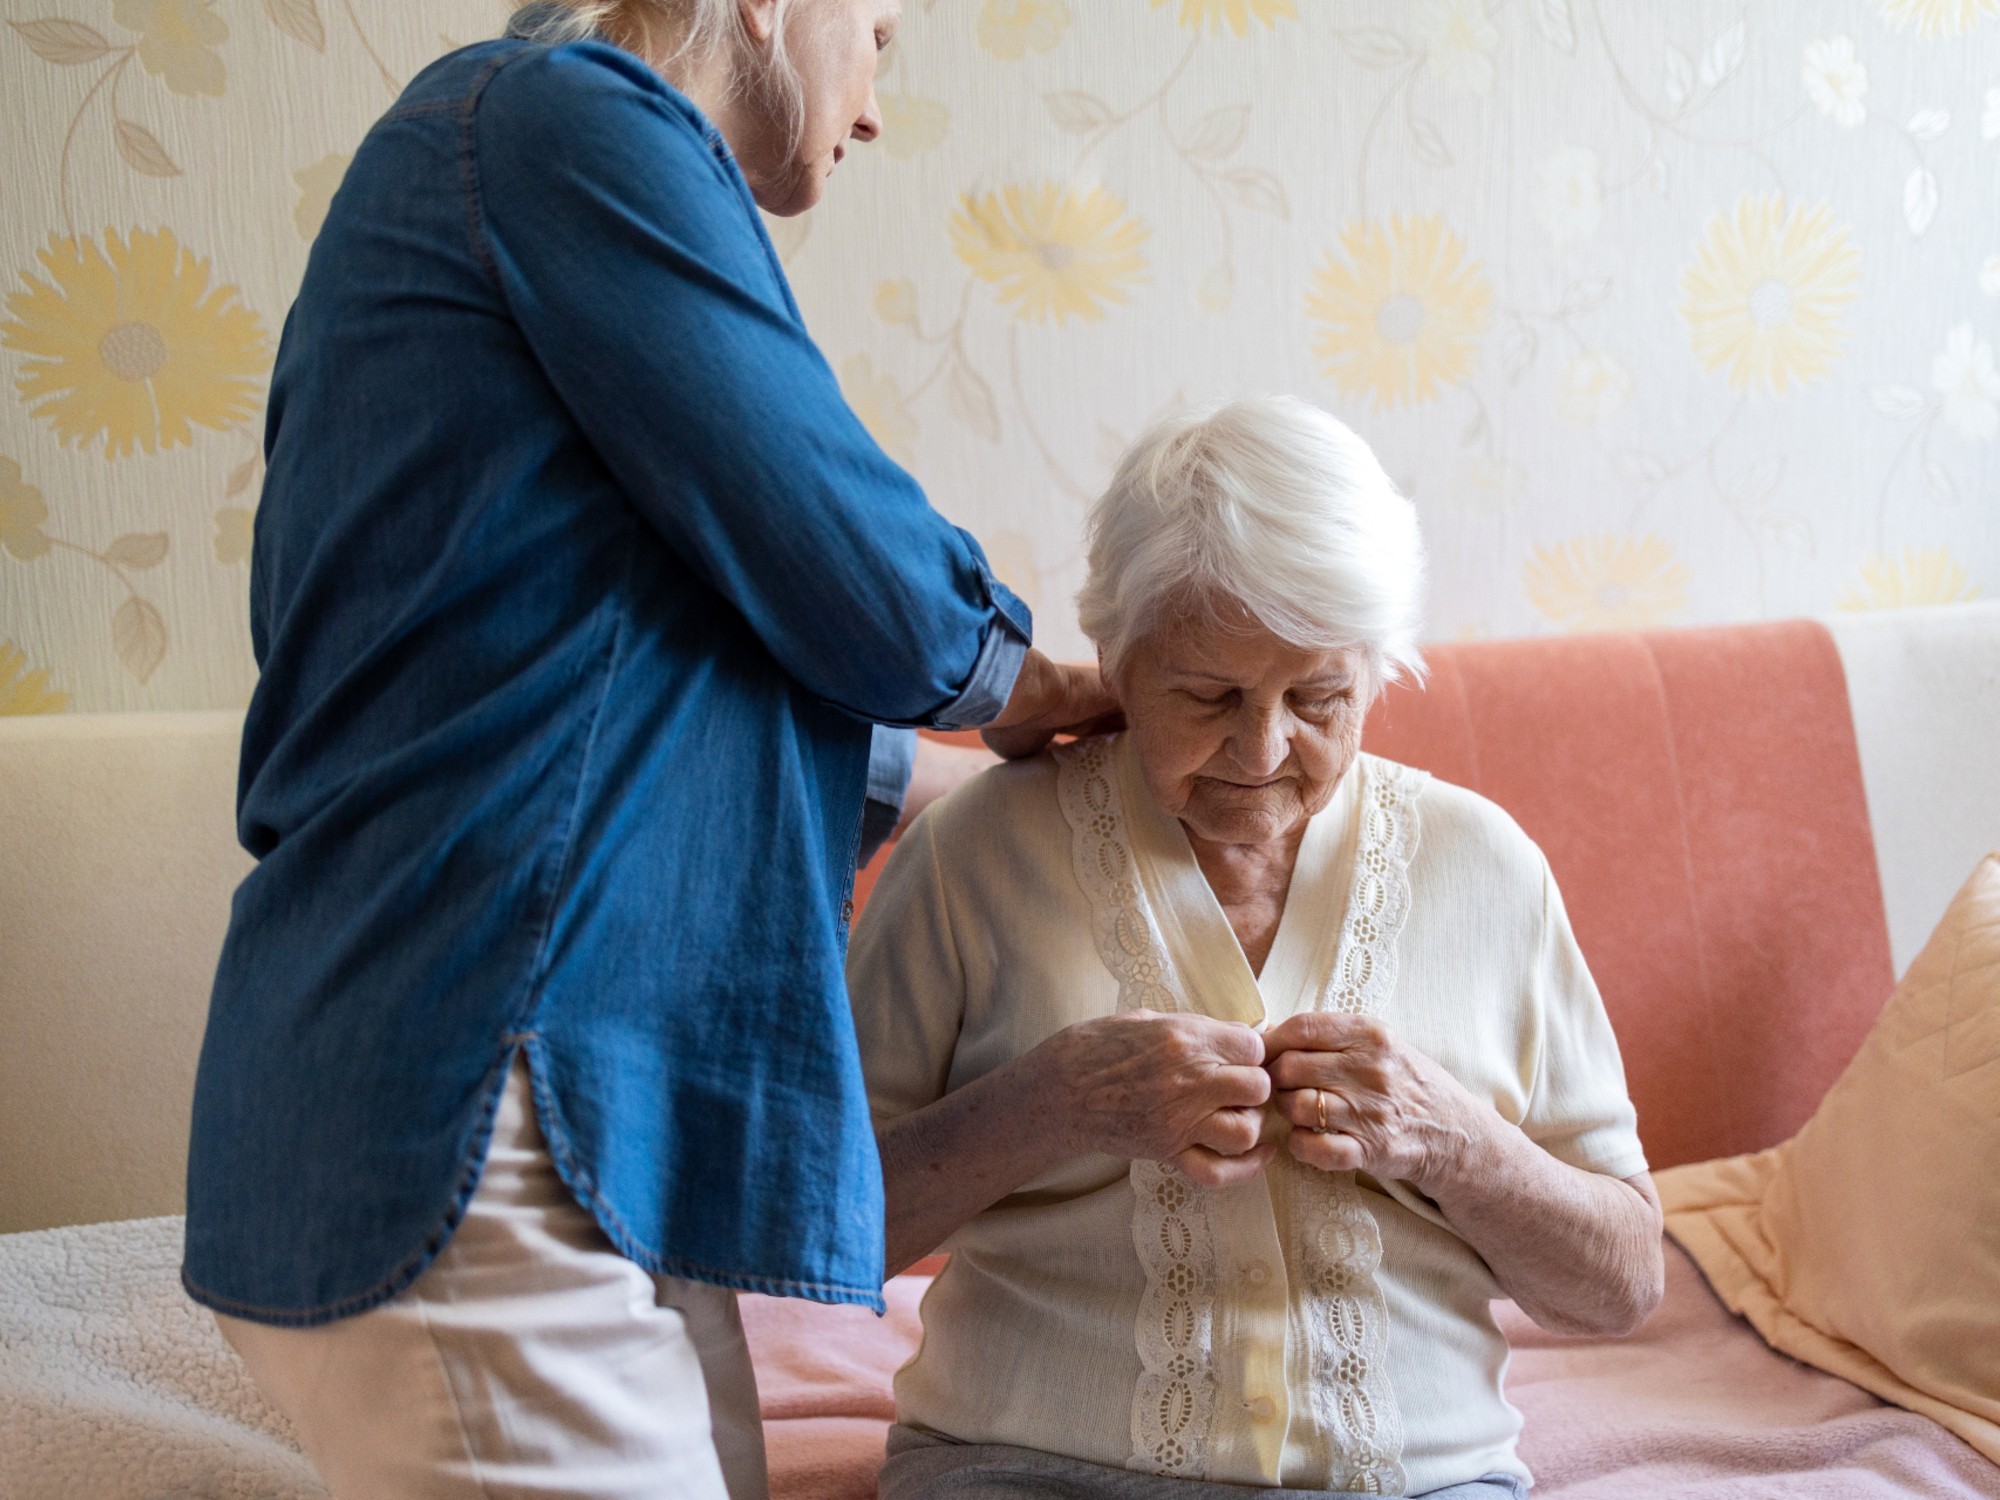 Older woman receives help at home from a carer